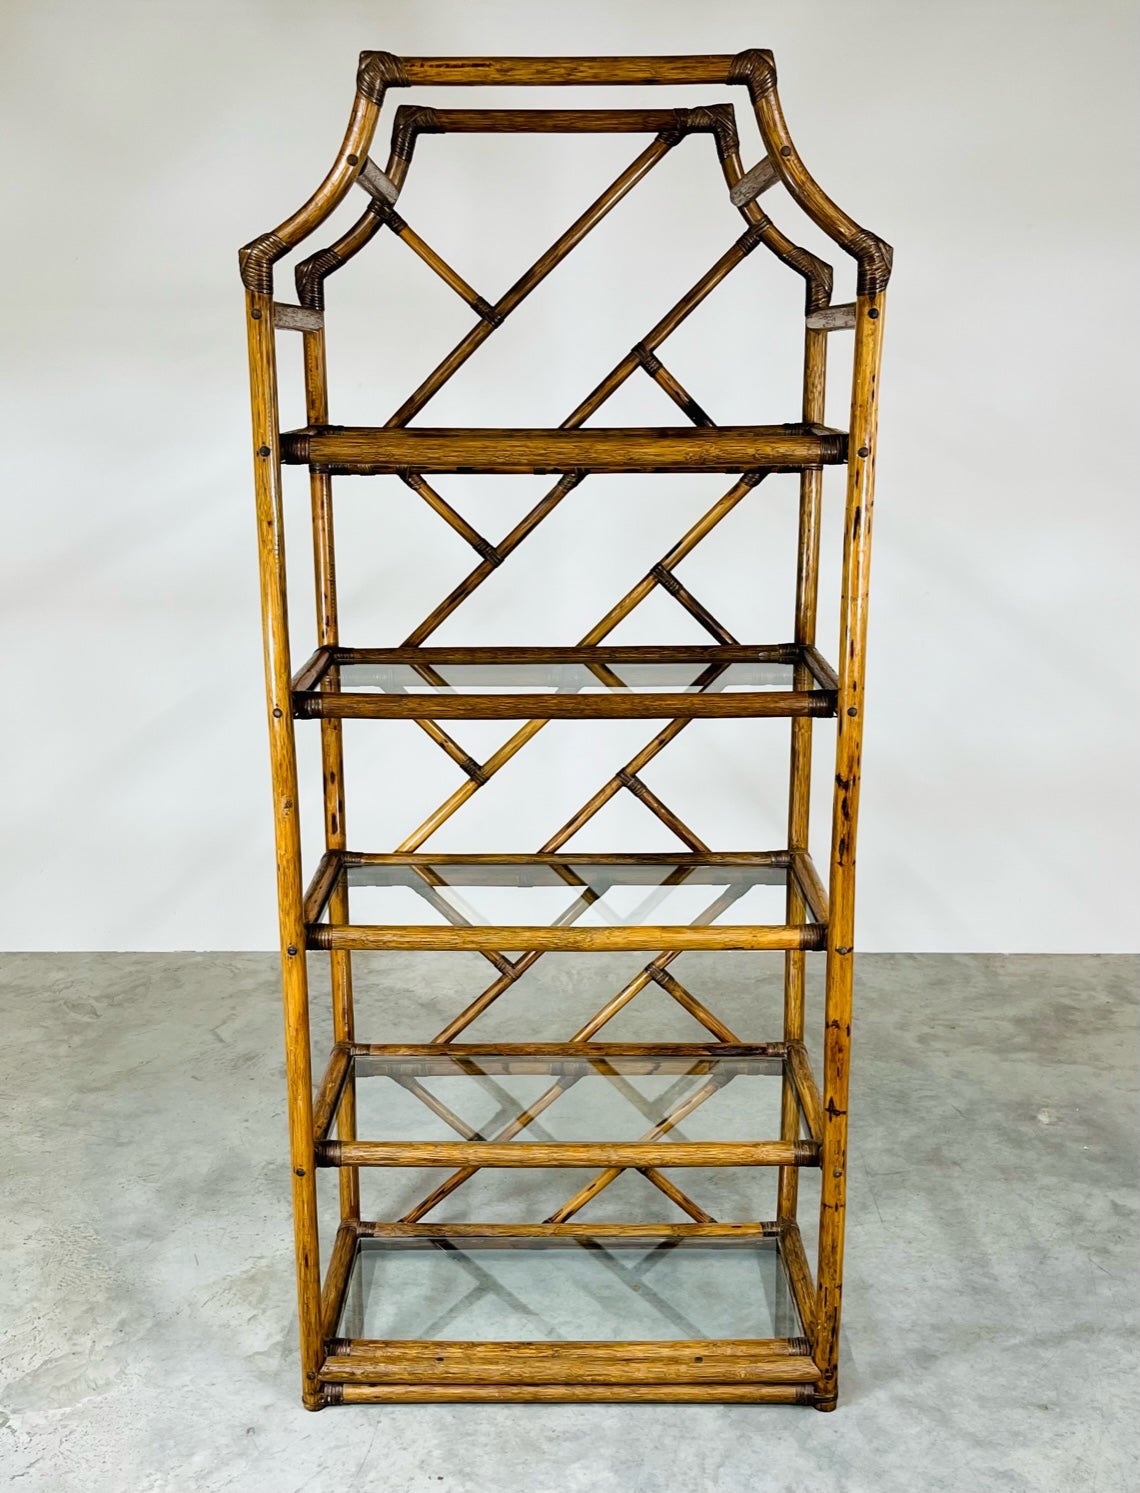 Beautiful Coastal rattan Chippendale glass shelf bamboo etagere having cane joinery with five glass shelves in outstanding condition. Perfect storage for books and collectibles. 
All glass is in great condition as well as the entire bamboo and cane